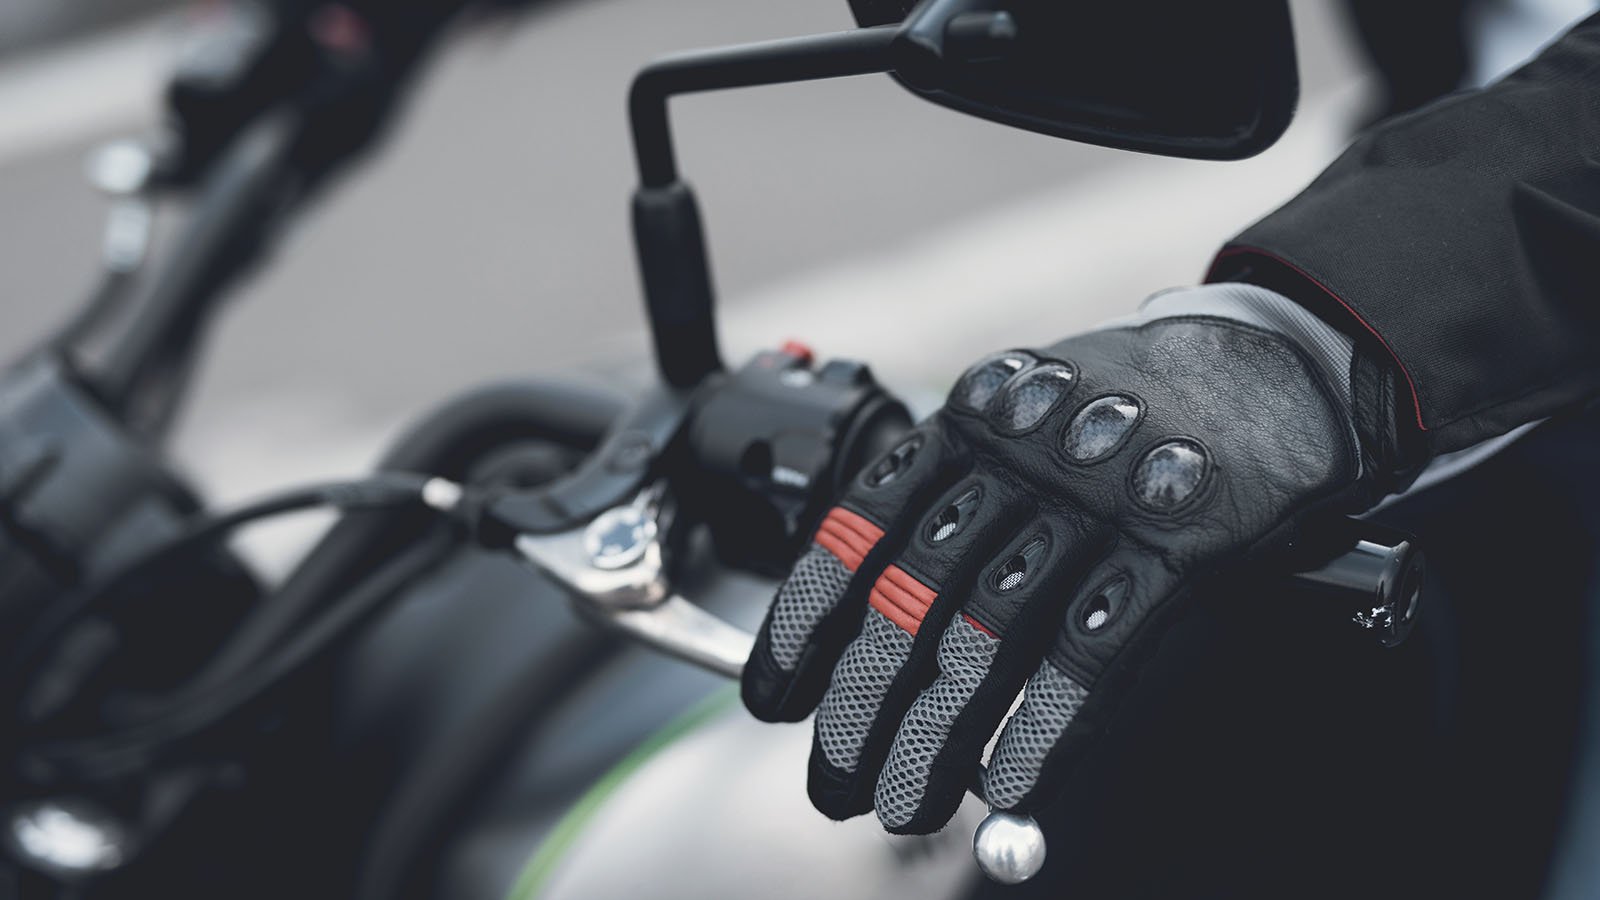 A gloved hand resting on the handles of a motorcycle representing VLCN stock.